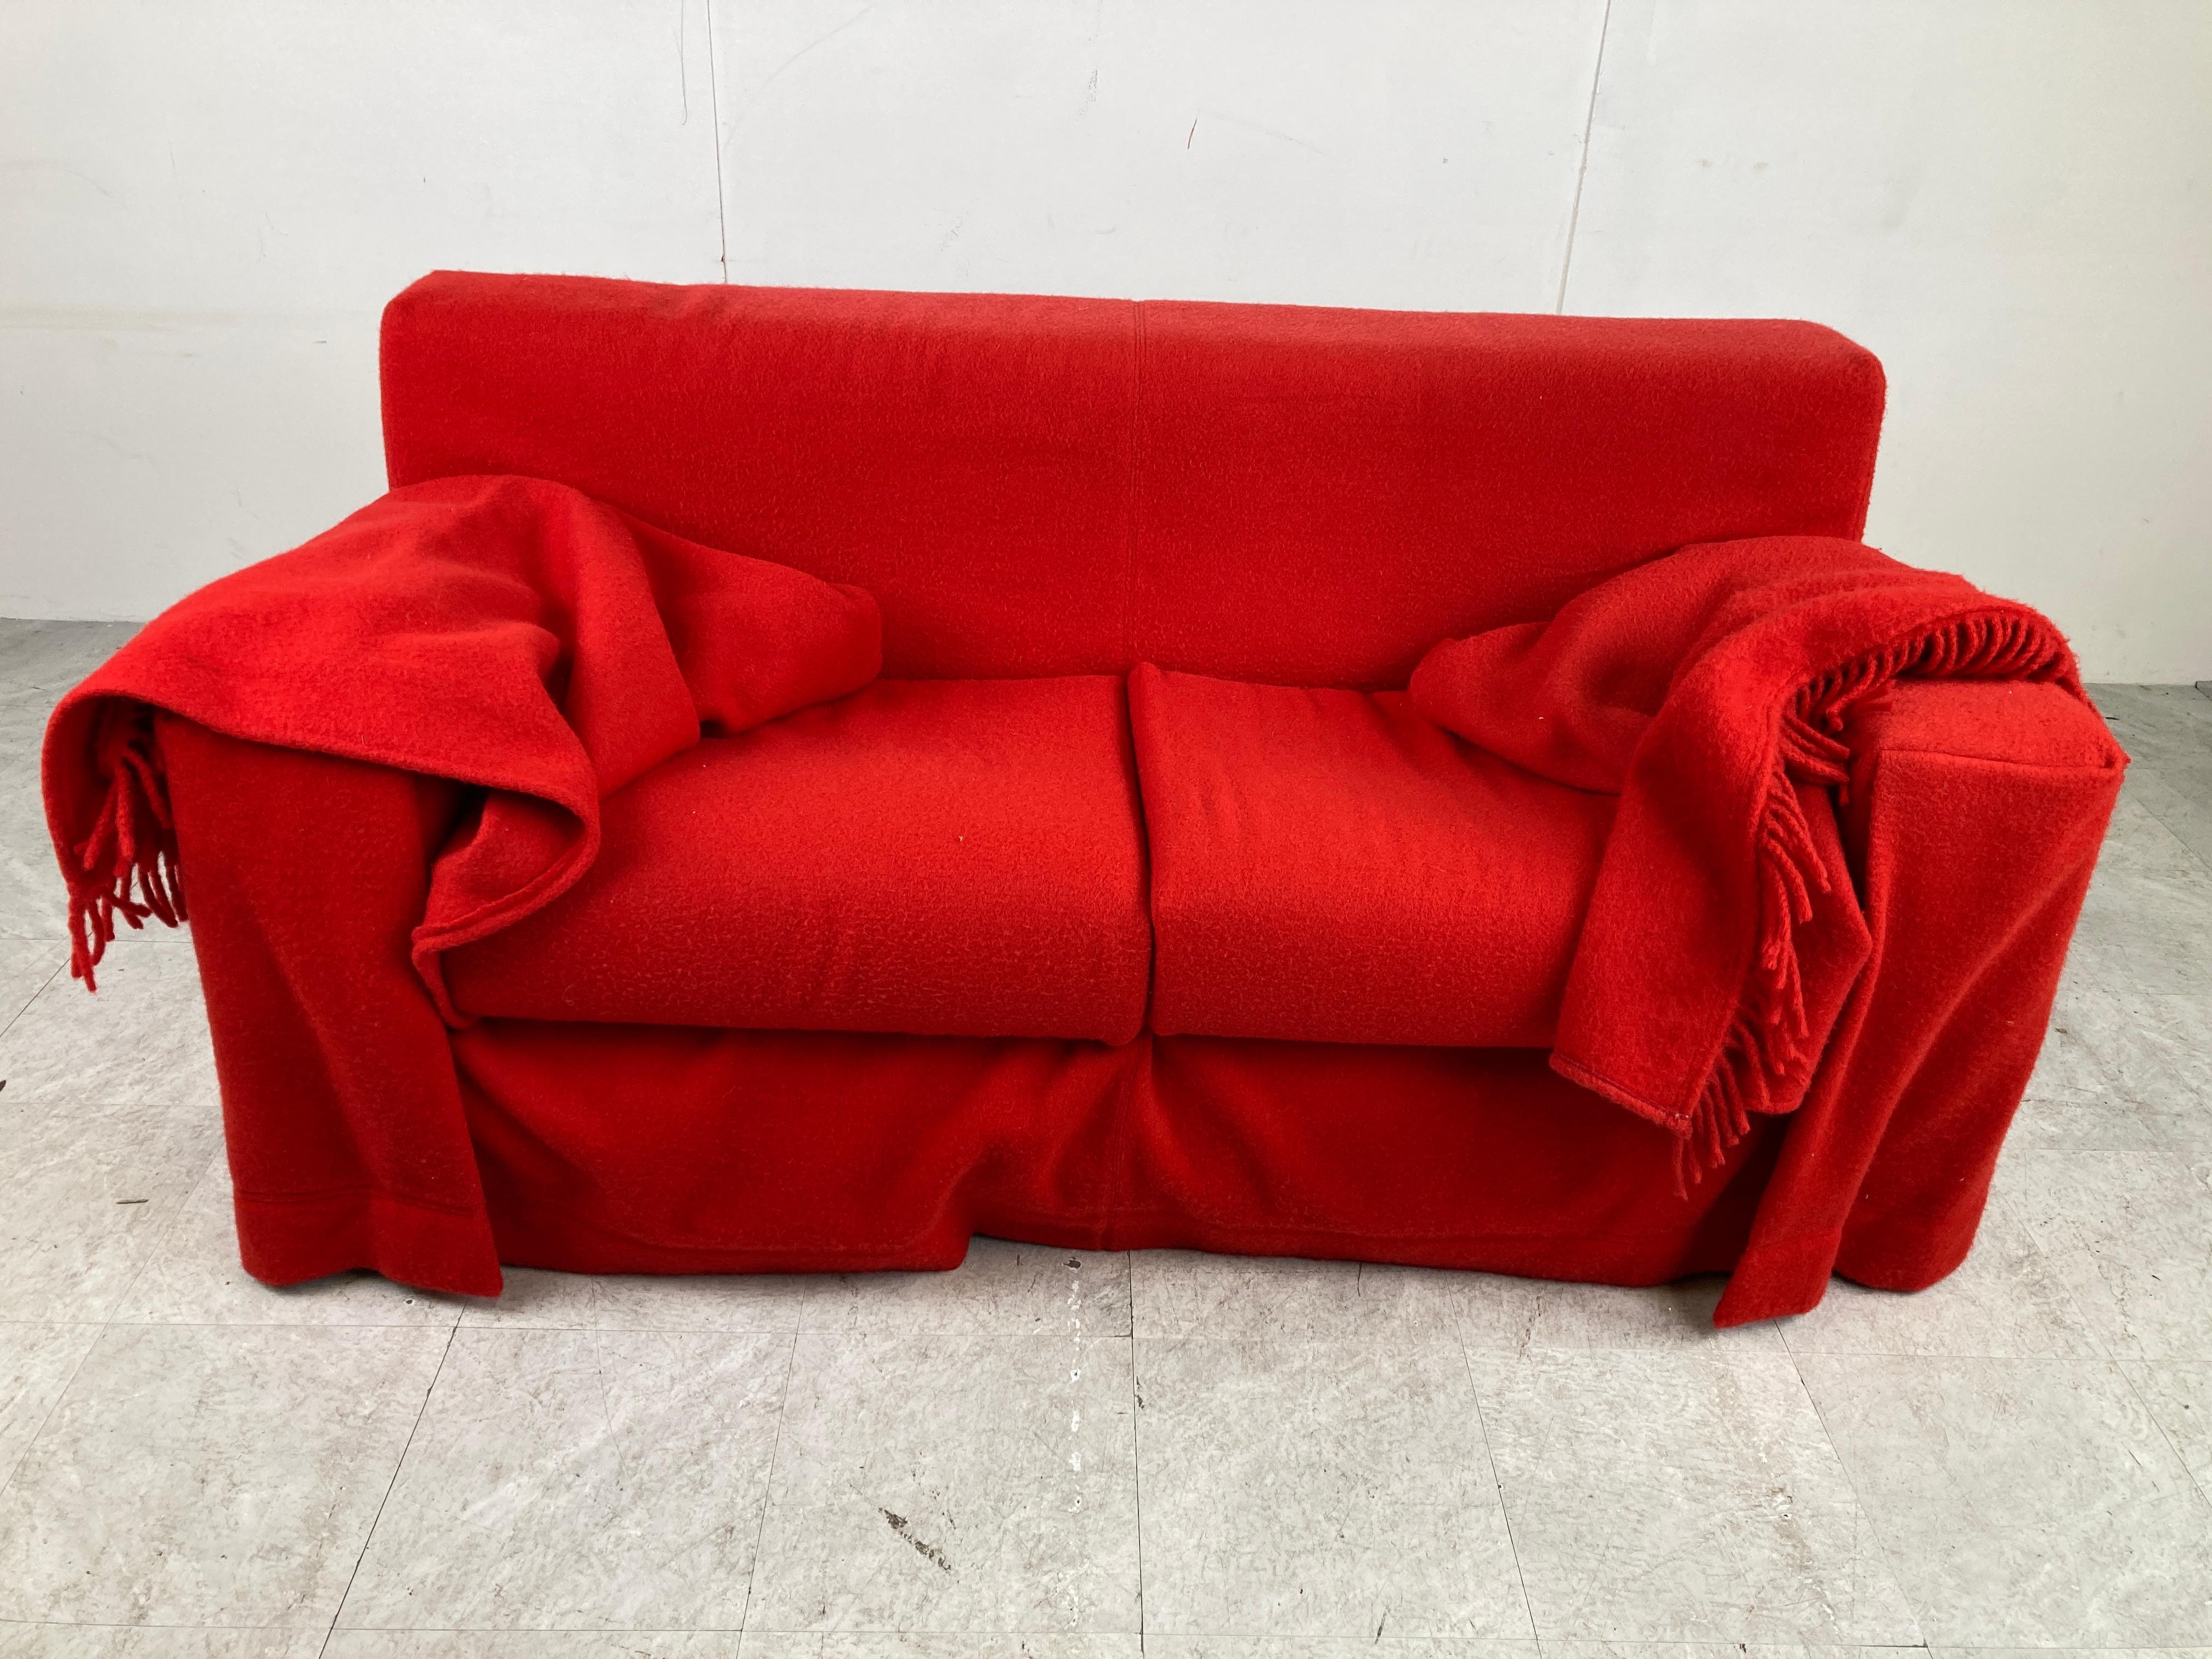 Gil Abiti Sofa by Gianfranco Ferré and Paolo Nava for B and B Italia, 1990s For Sale 4